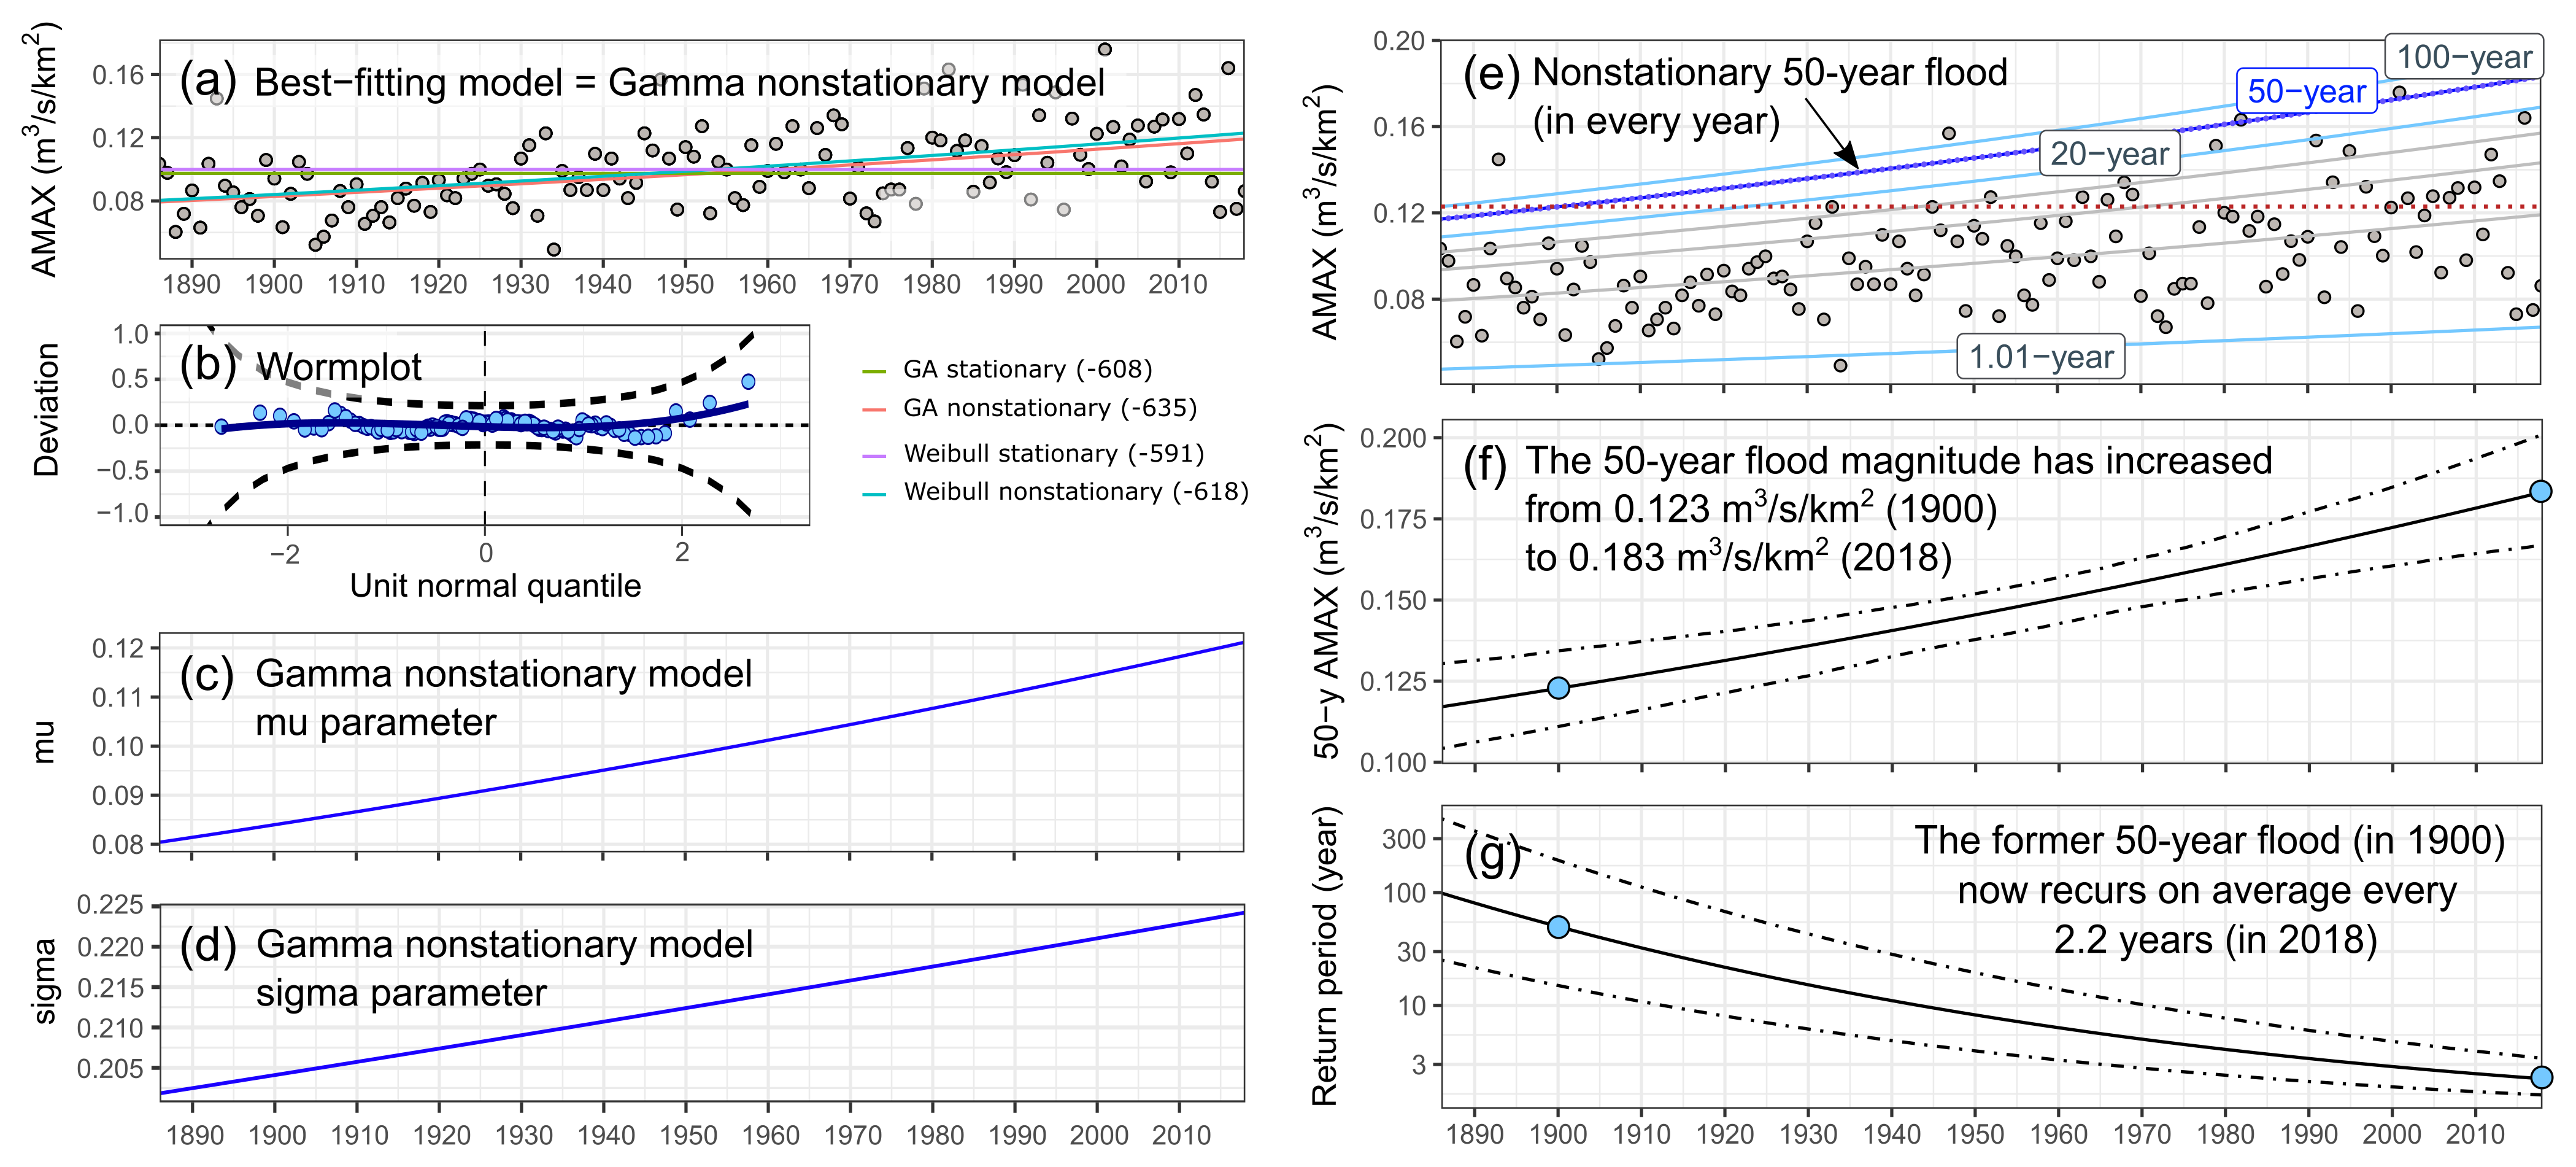 Hess Nonstationary Weather And Water Extremes A Review Of Methods For Their Detection Attribution And Management